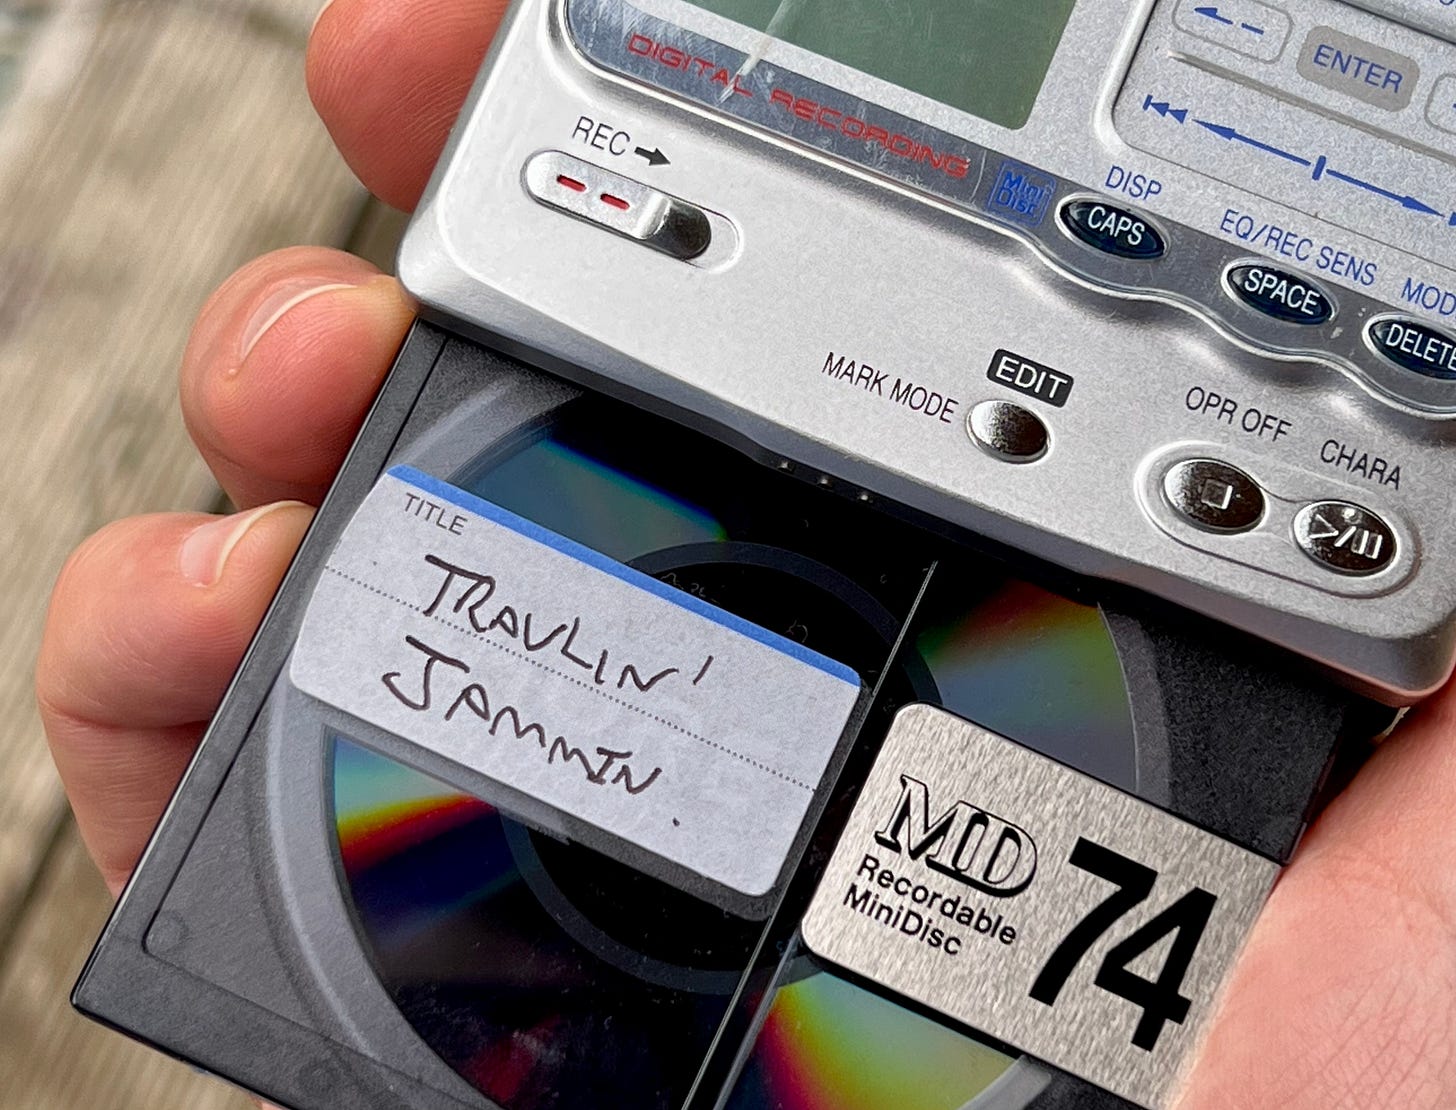 An Image of a mini displayer with her MiniDisc hanging out of it saying travellin' jammin